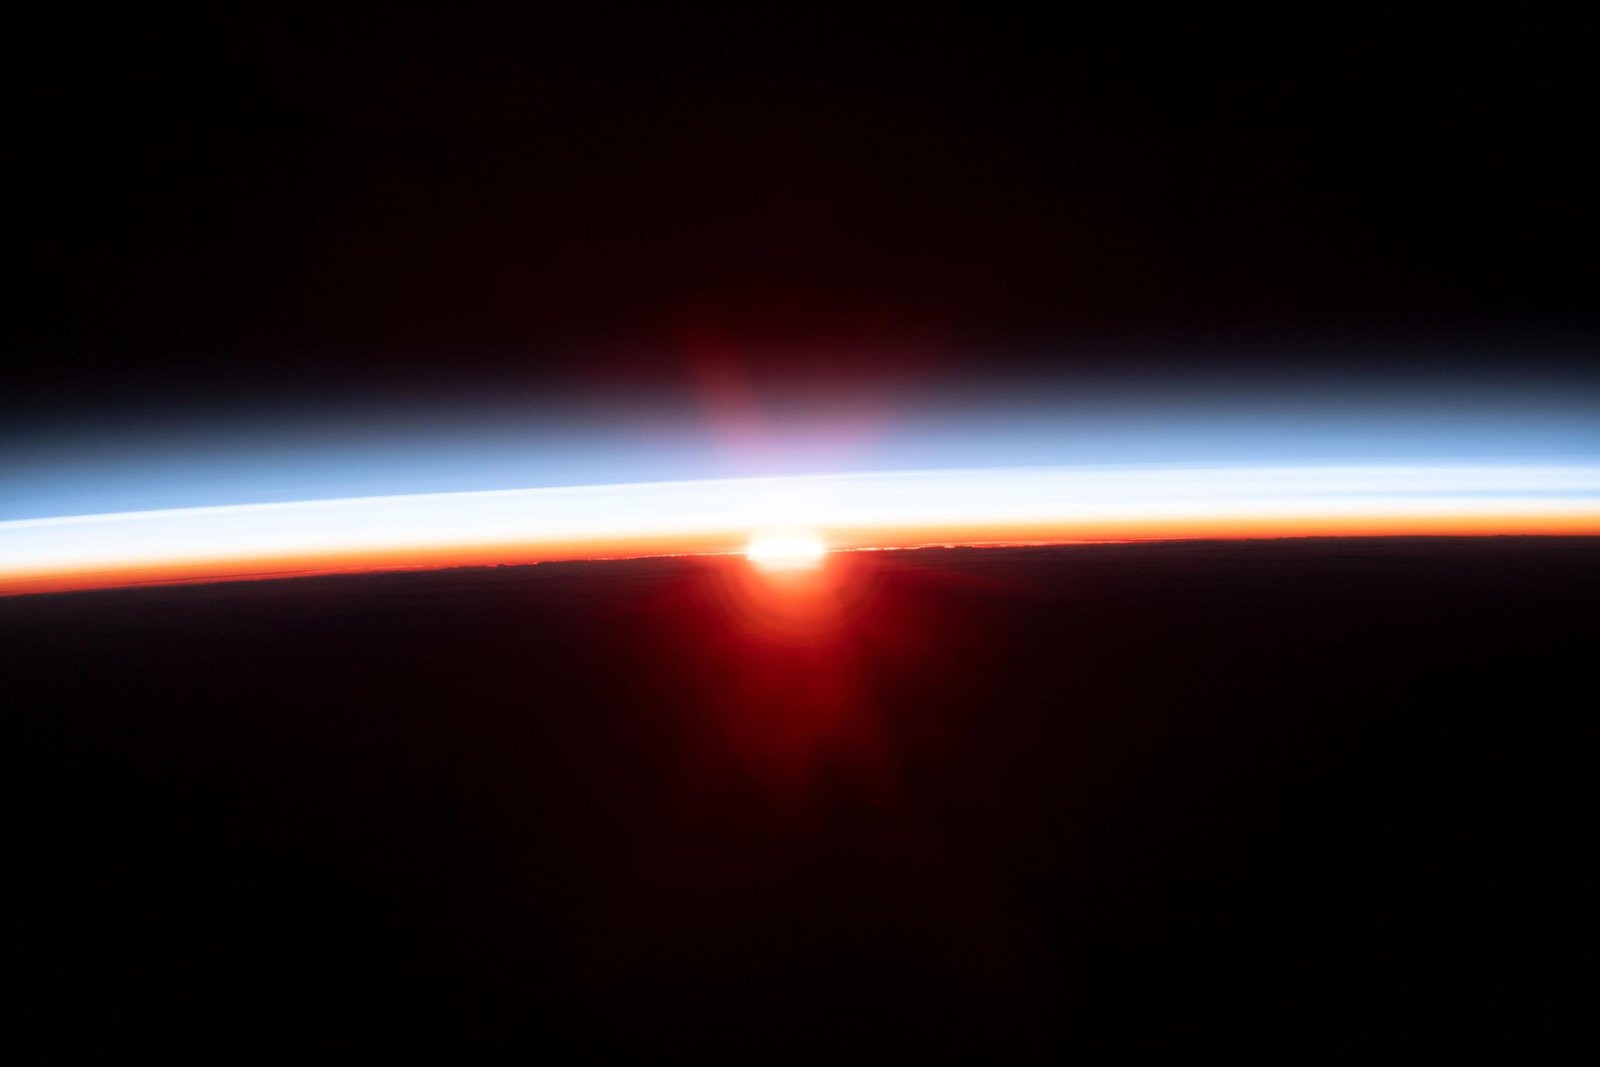 A Spectacular Sunrise Seen From the Space Station